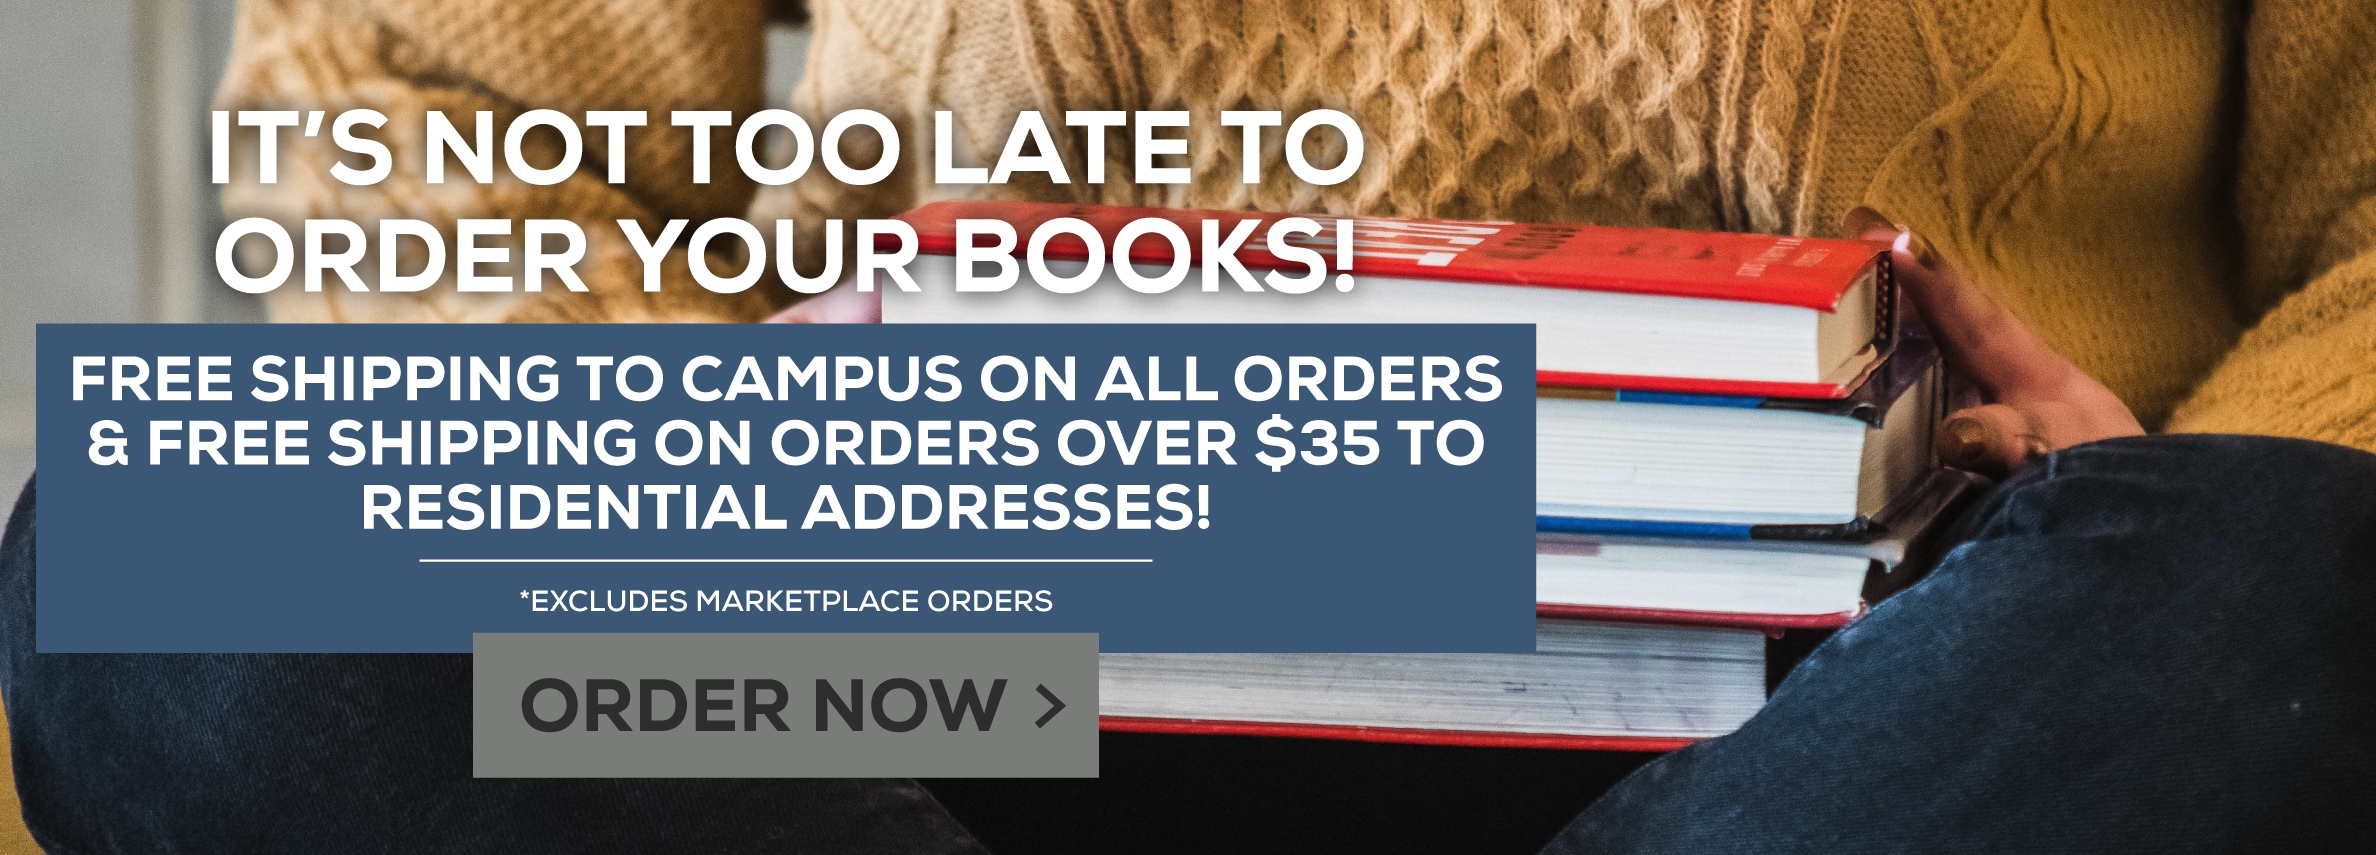 It's not too late to order your books!  Free shipping to campus on all orders & free shipping on orders over $35 to residential addresses!* *Excludes Marketplace Purchases Order Now.